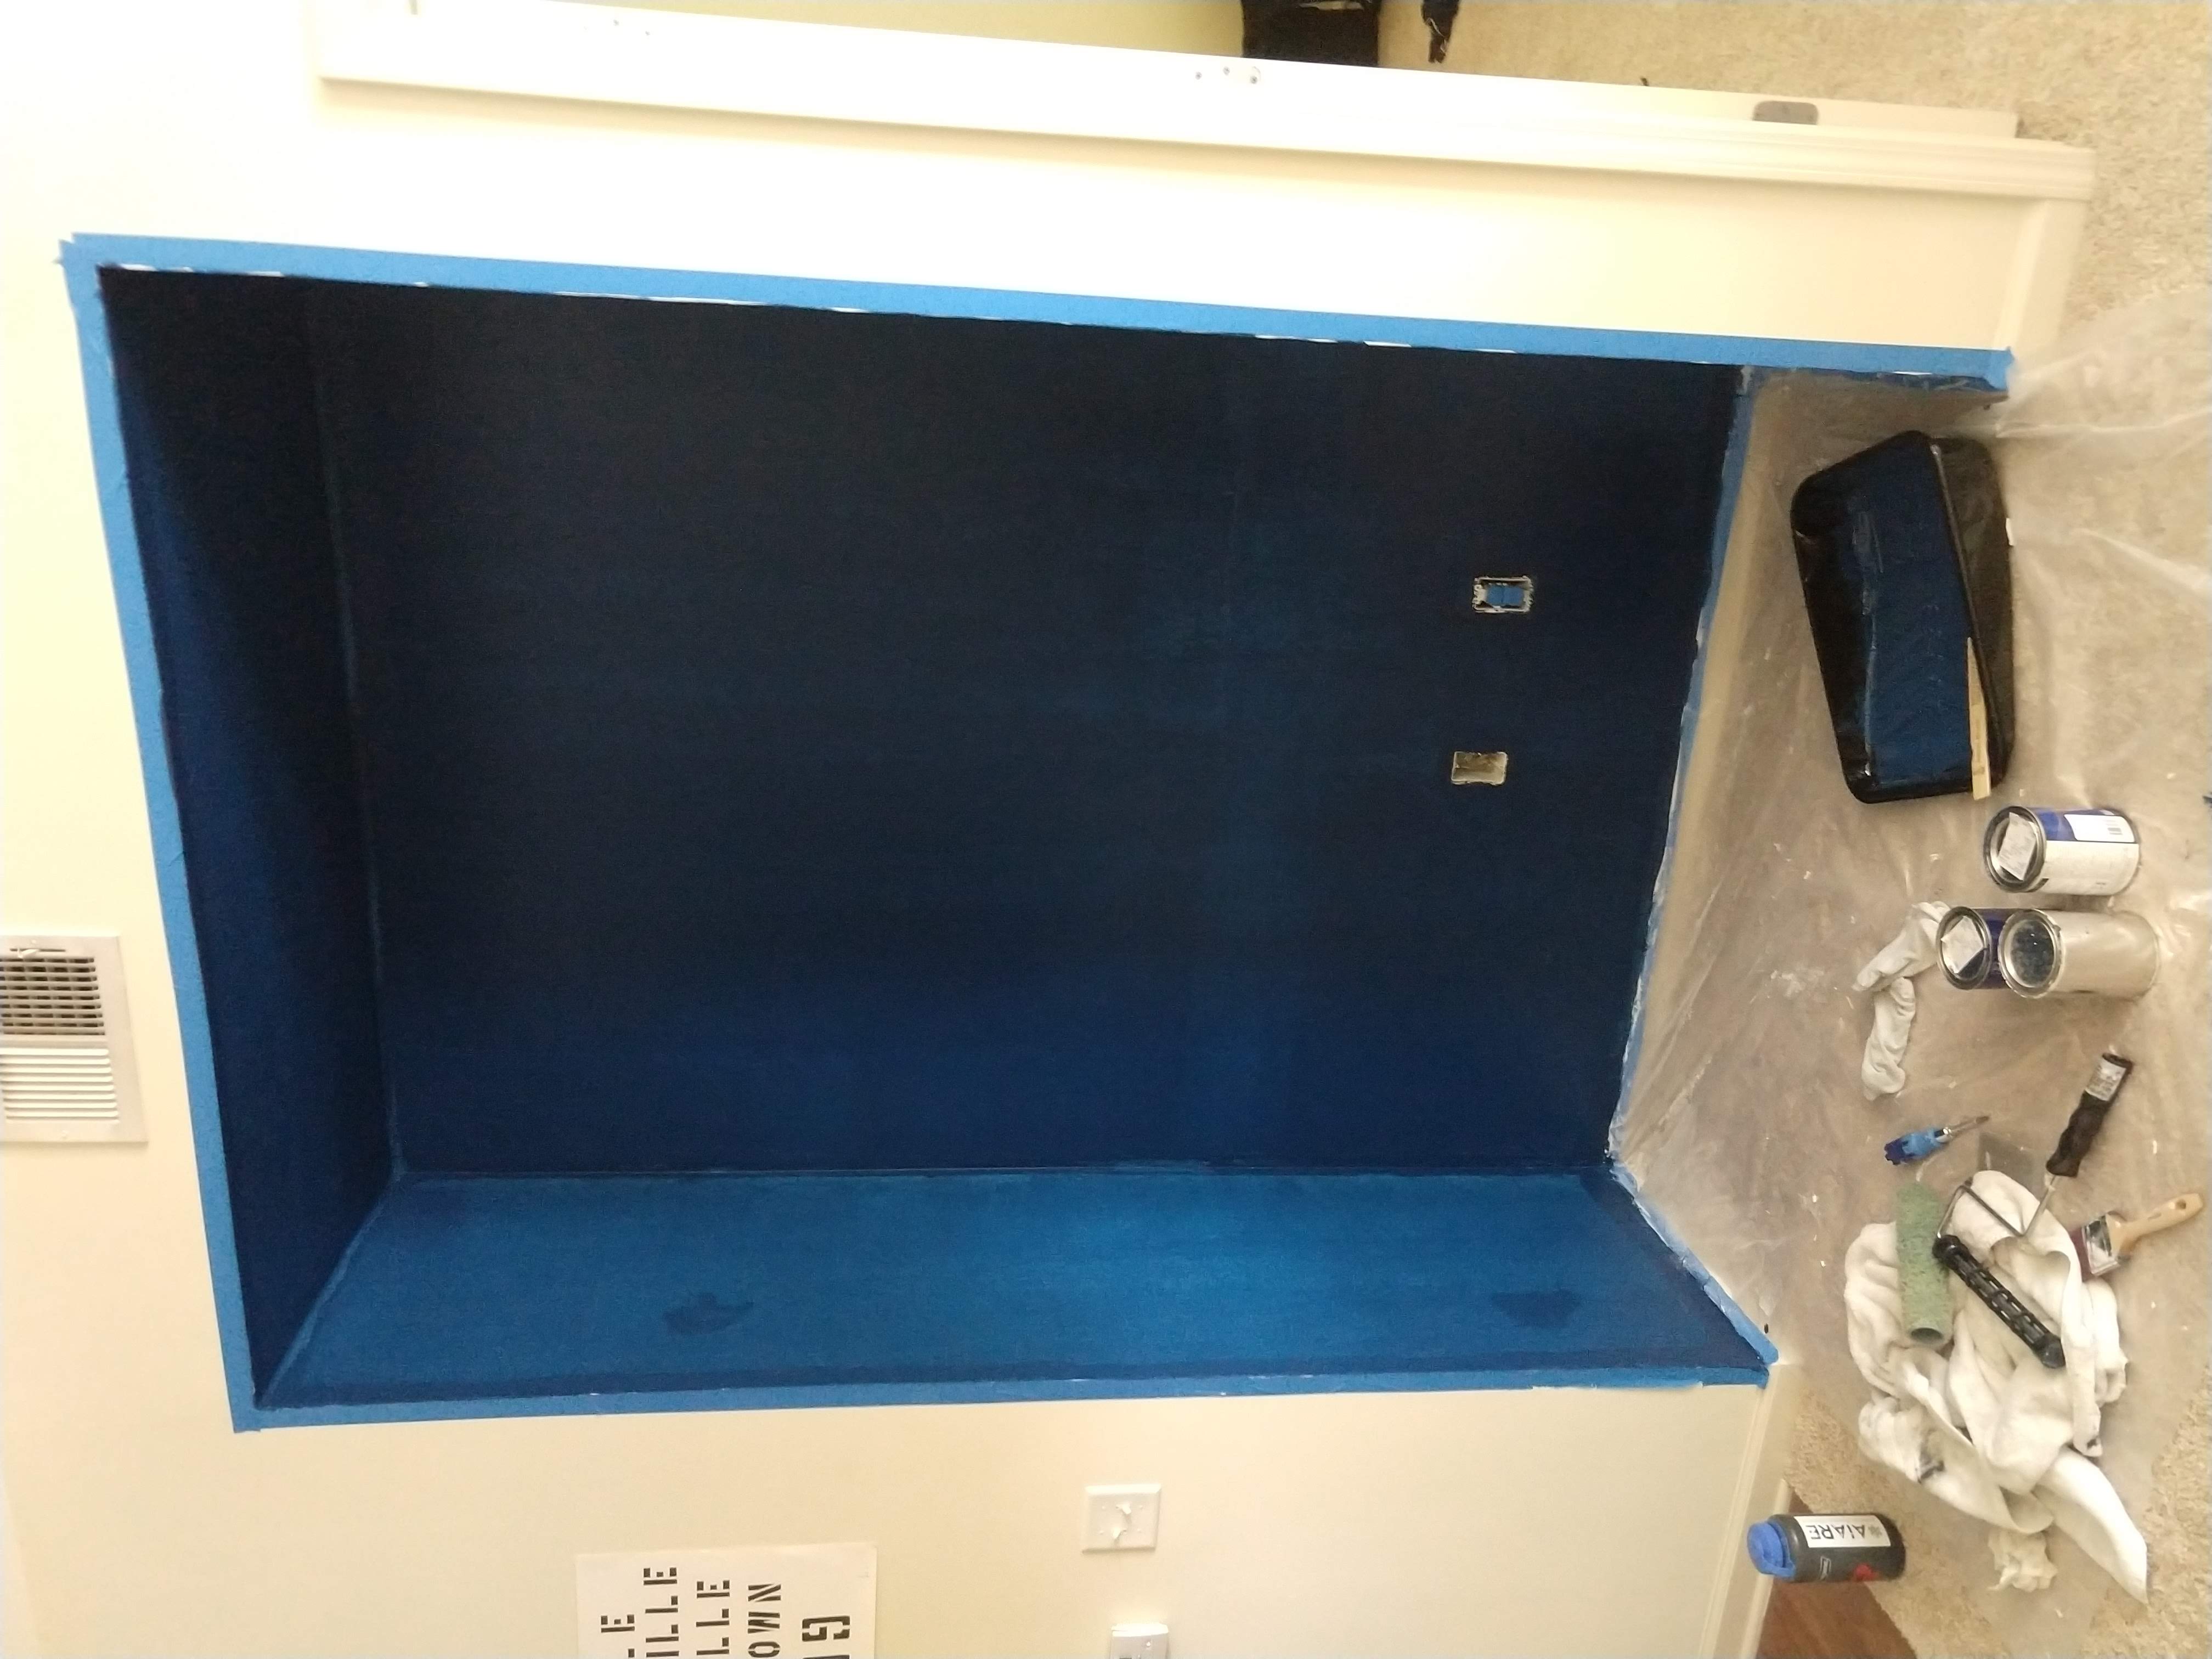 Photo of the nook now painted a mottled blue color, clearly still needing some additional coats.